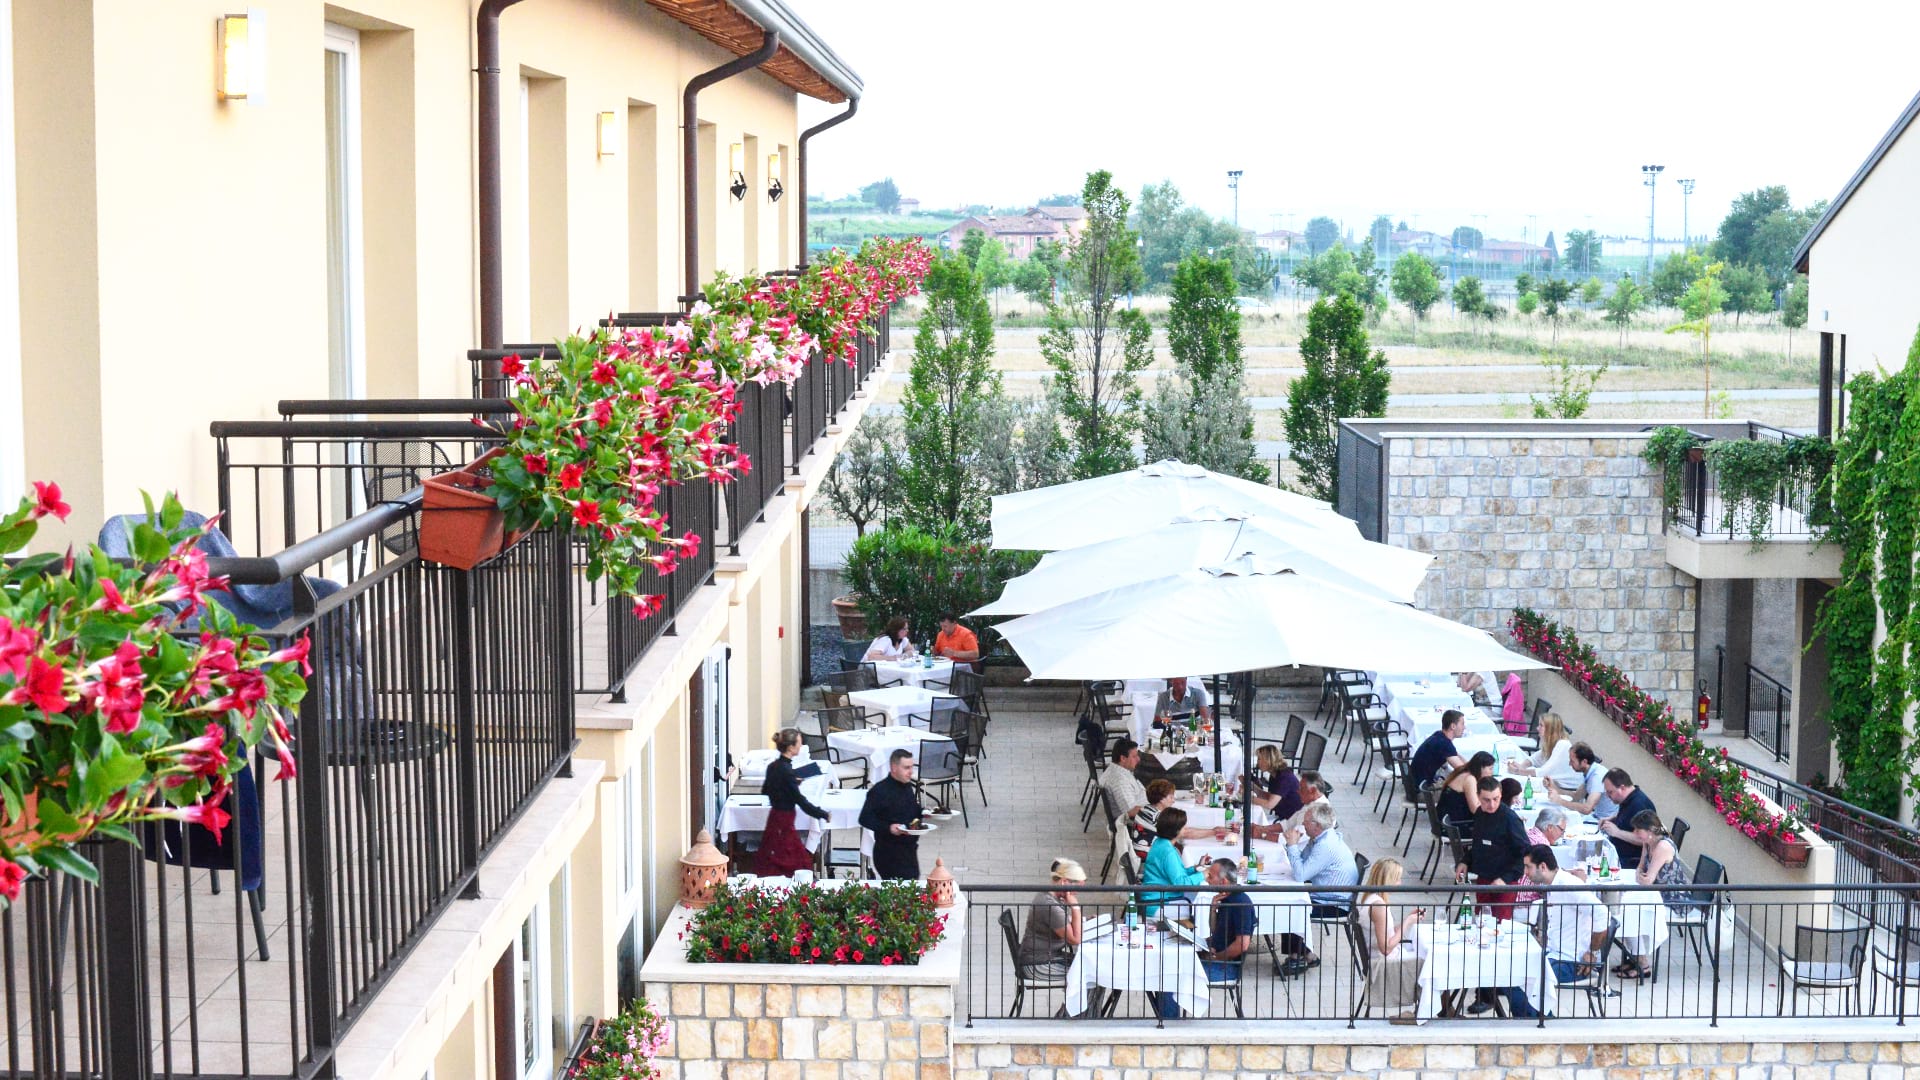 outer terrace of the restaurant